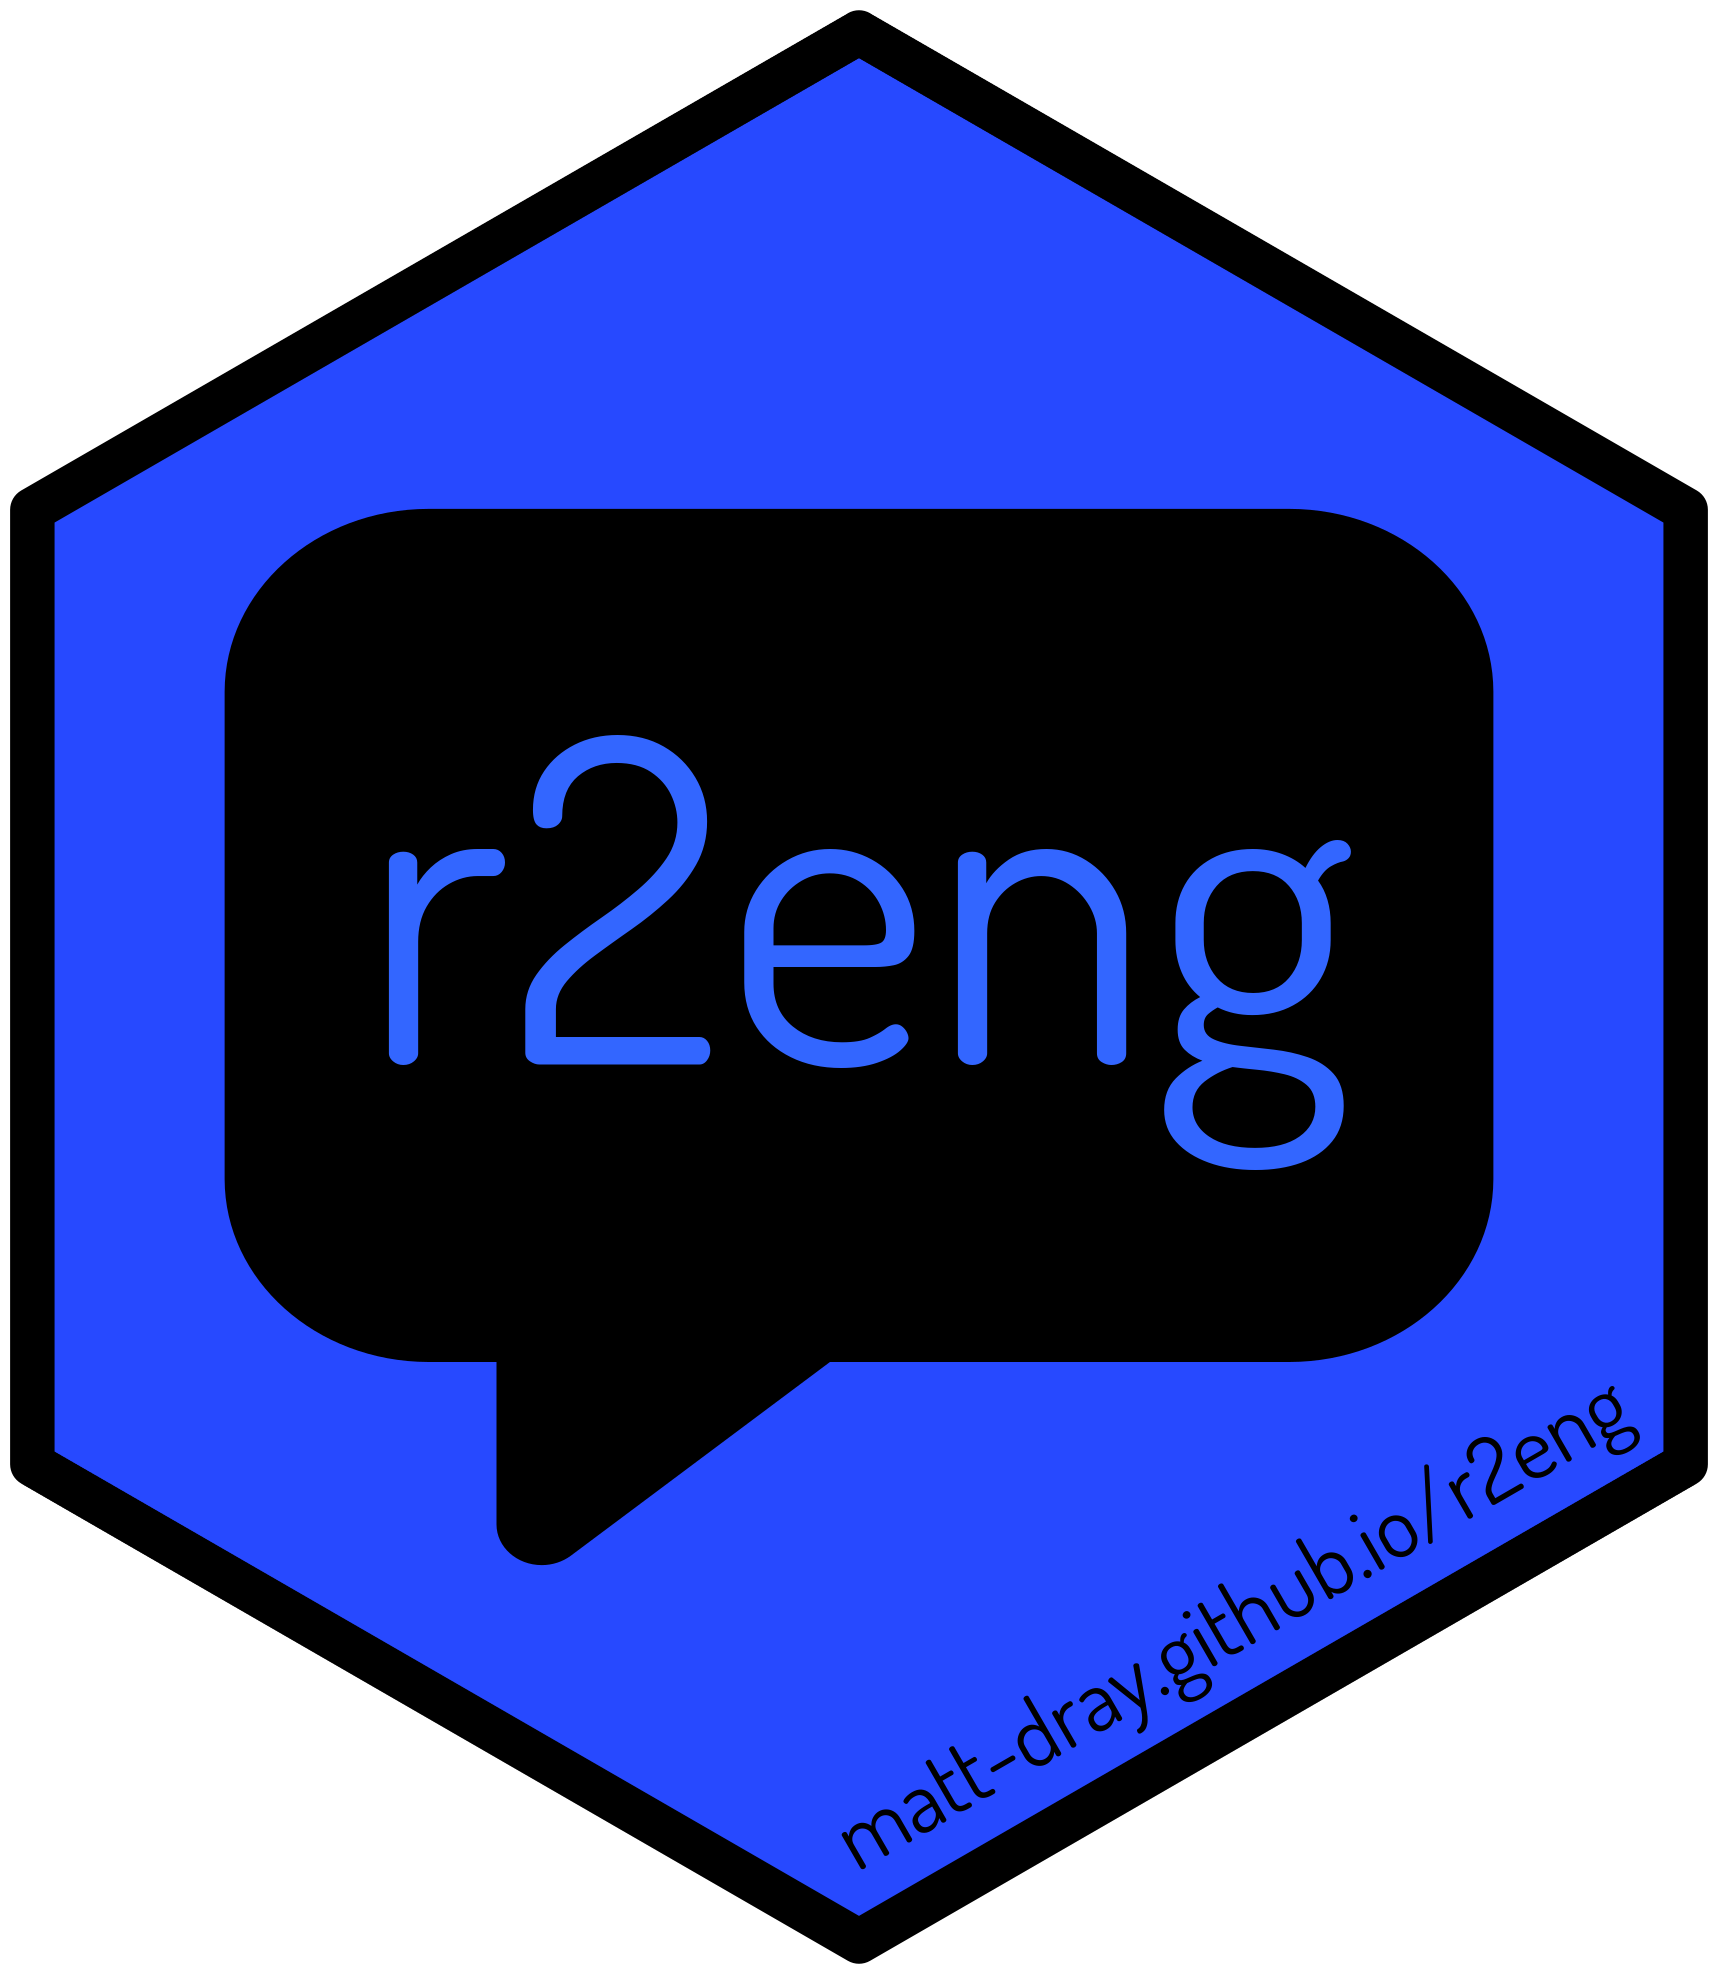 Hexagonal logo for the r2eng package showing the package name inside a speech bubble with the URL matt-dray.github.io/r2eng.